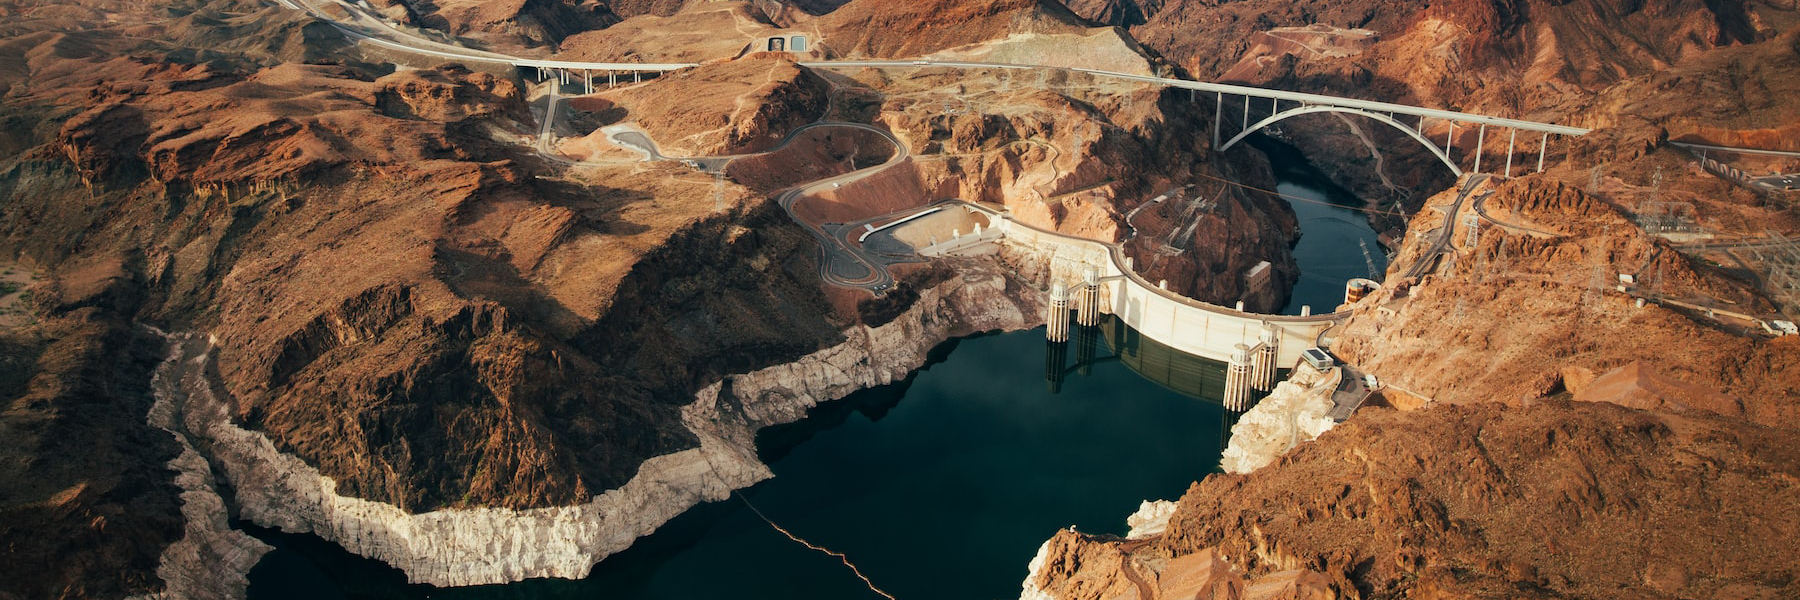 Aerial view of Hoover Dam, NV.